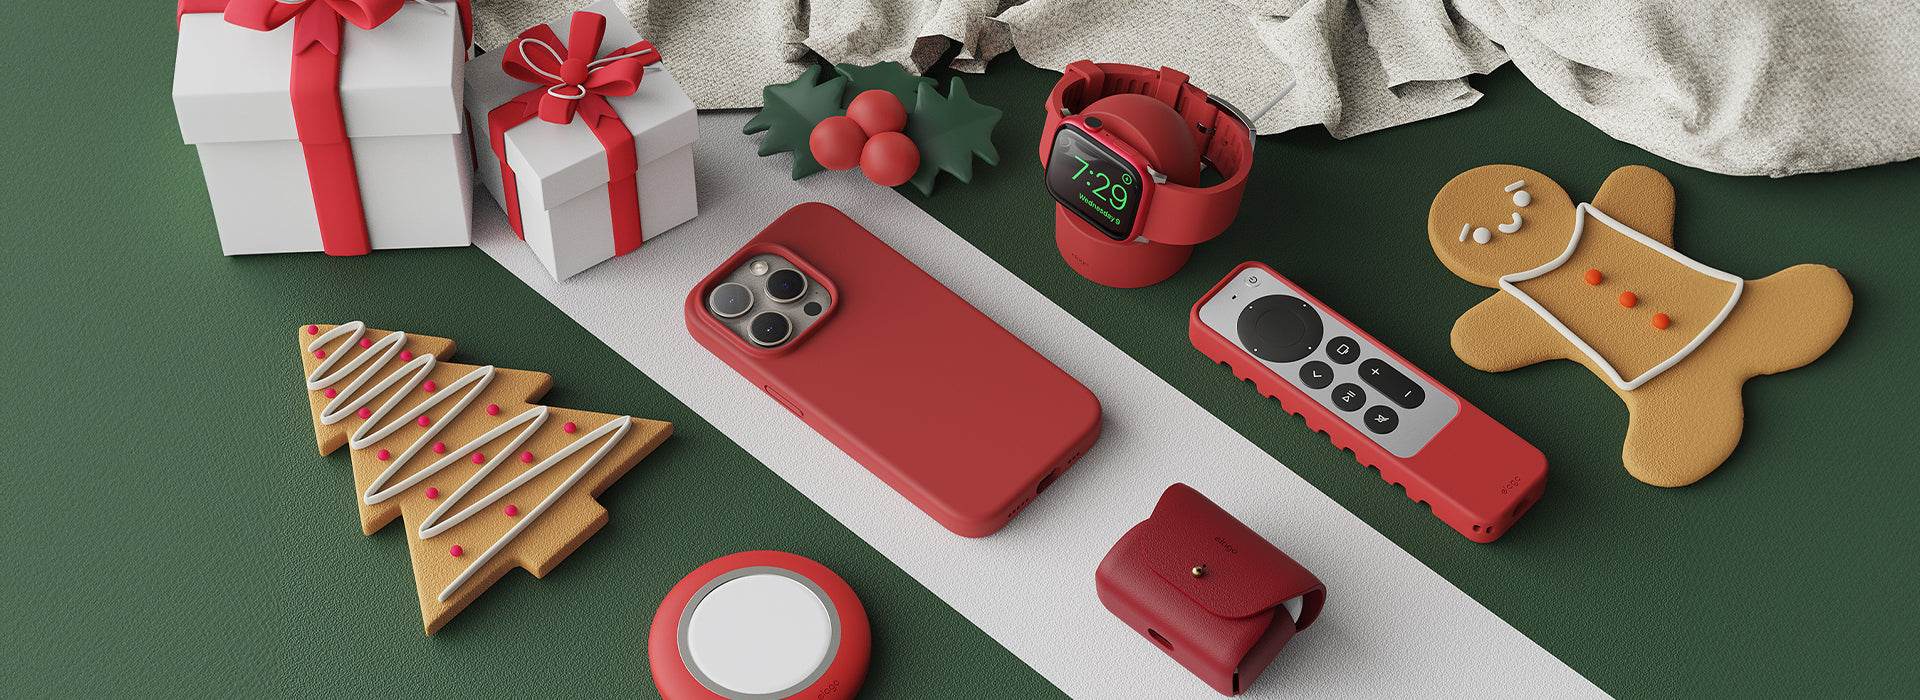 Deck the halls with gadgets for tech workers